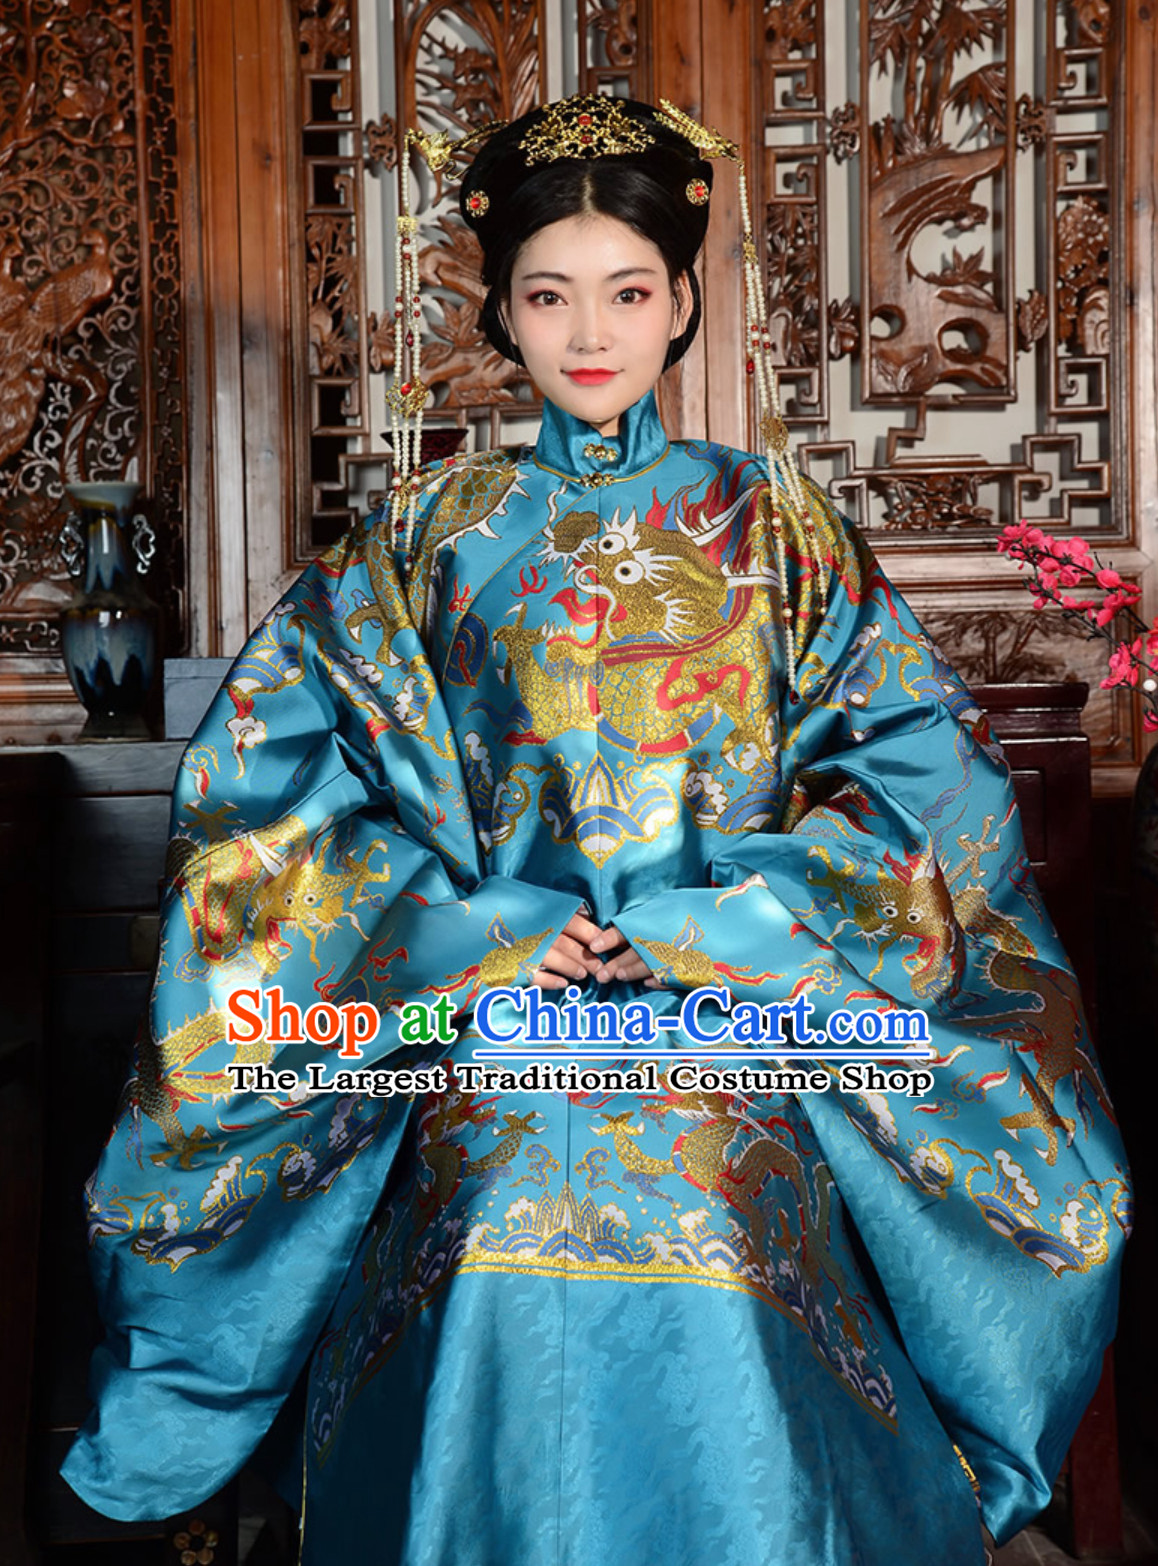 Top Imperial Blue Chinese Ancient Royal Wedding Dress Ming Dynasty Queen Clothing for Ladies